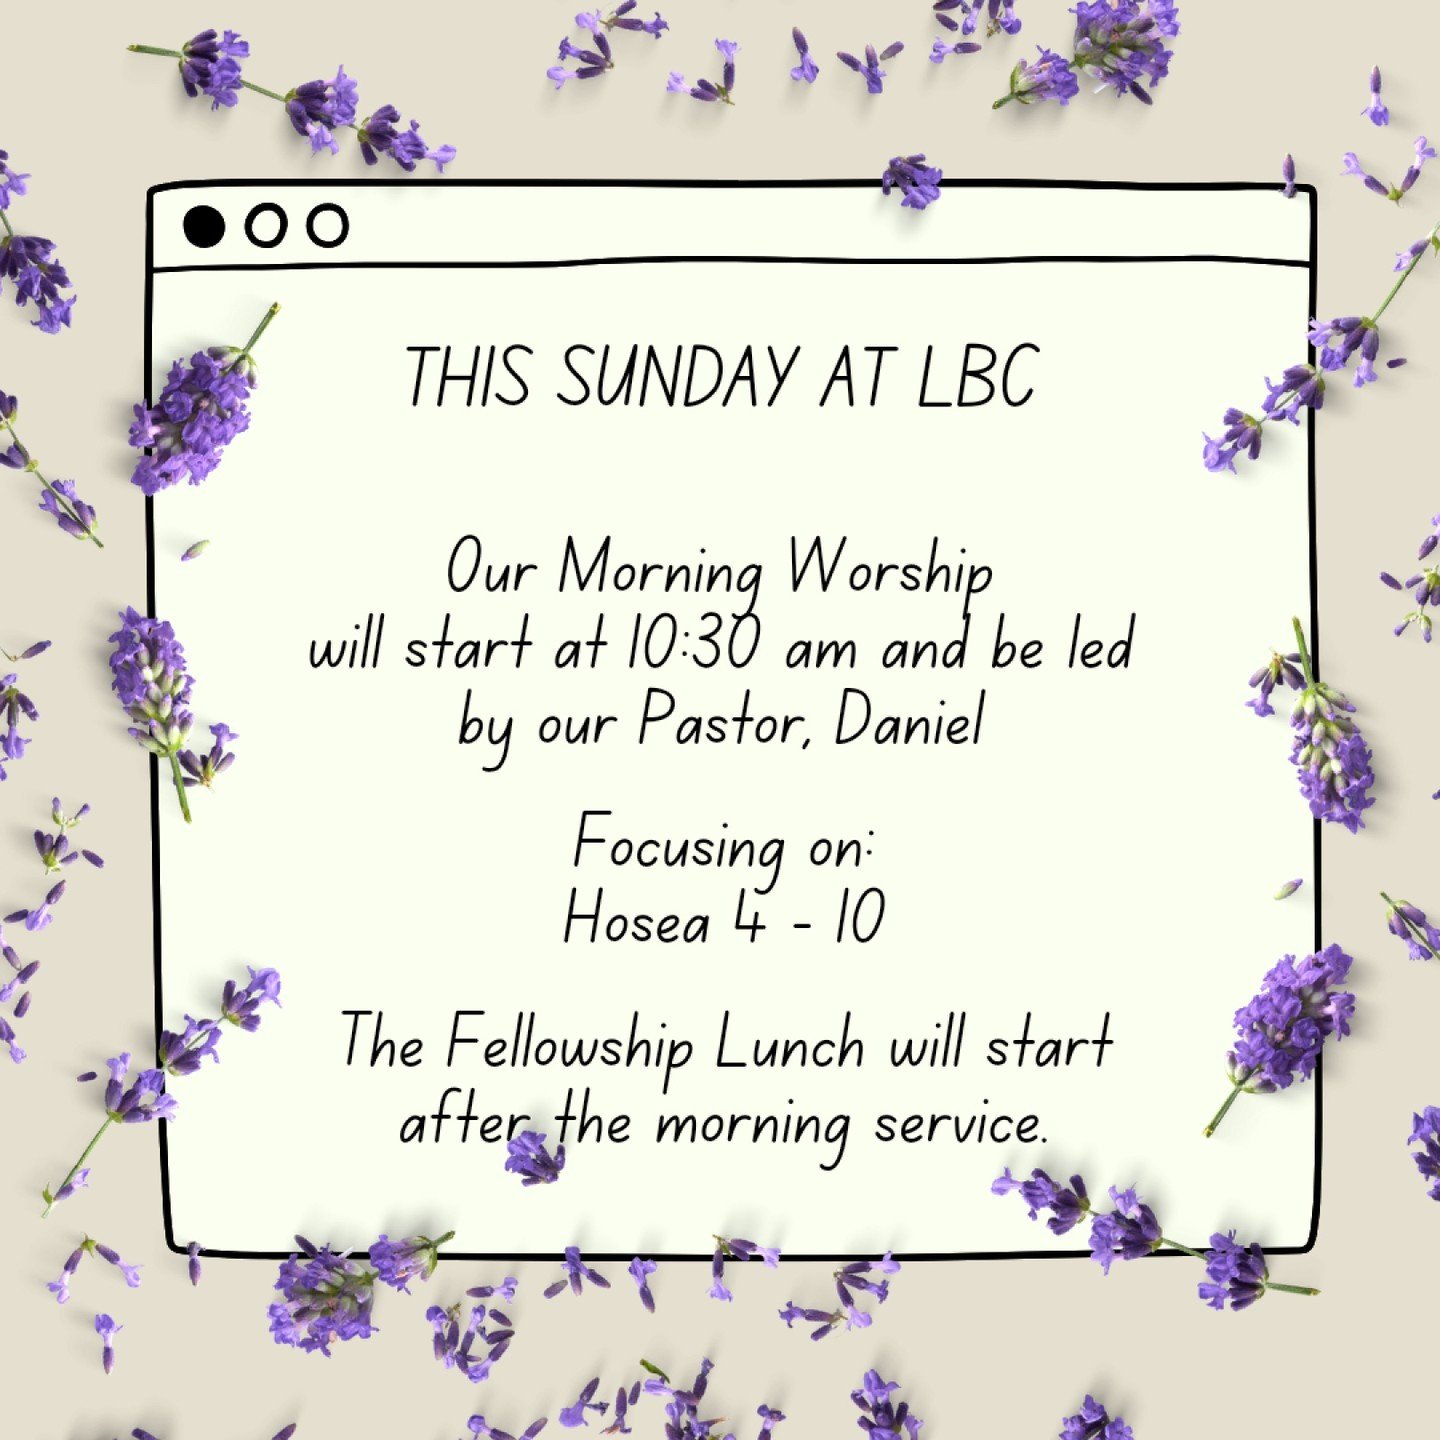 Please join us this Sunday at Lincoln Baptist Church  from 10:00 am for refreshments and fellowship before the service starts at 10:30am where  our Pastor, Daniel will be focusing on Hosea 4-10

Please stay after the morning service for our monthly F